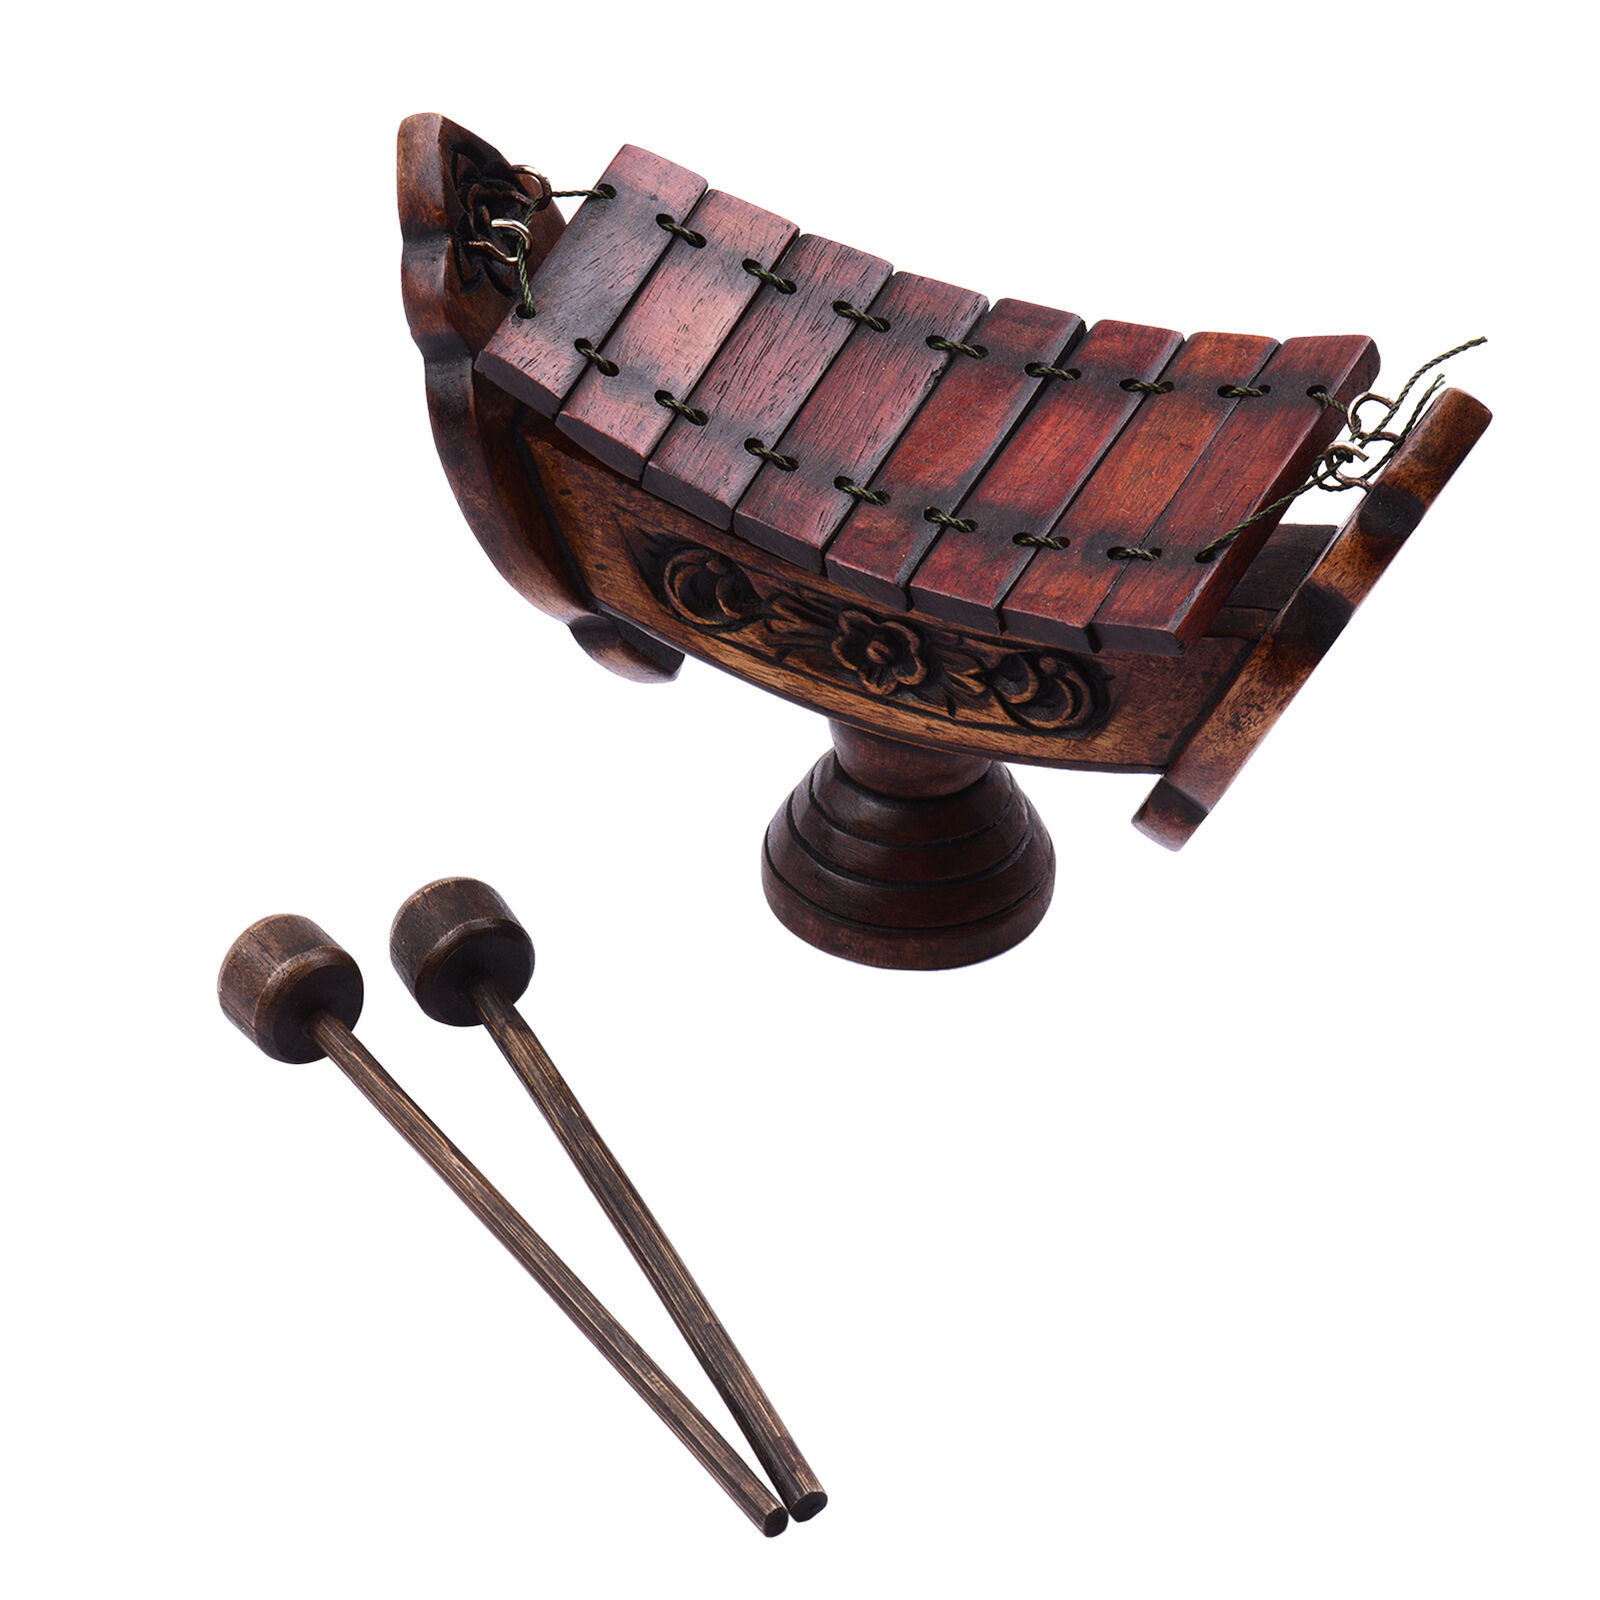 8 Notes Xylophone Teak Wood Thai Traditional Percussion Musical Instrument L1p8